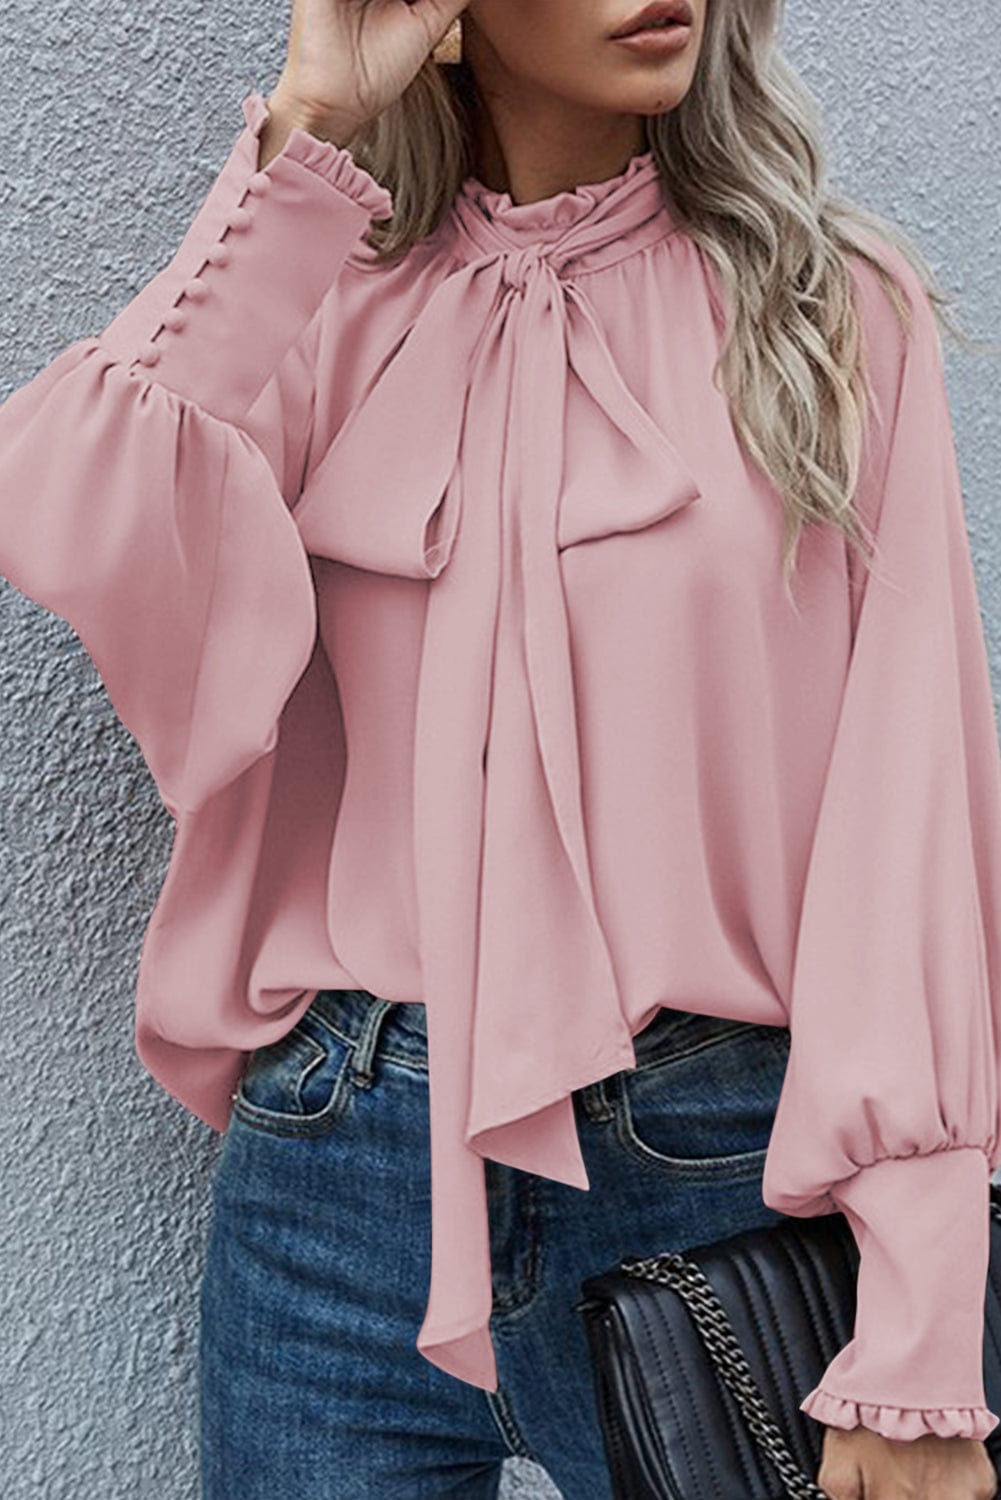 The802Gypsy  Tops Pink / S / 100%Polyester Traveling Gypsy Frilled Mock Neck Bishop Sleeve Blouse